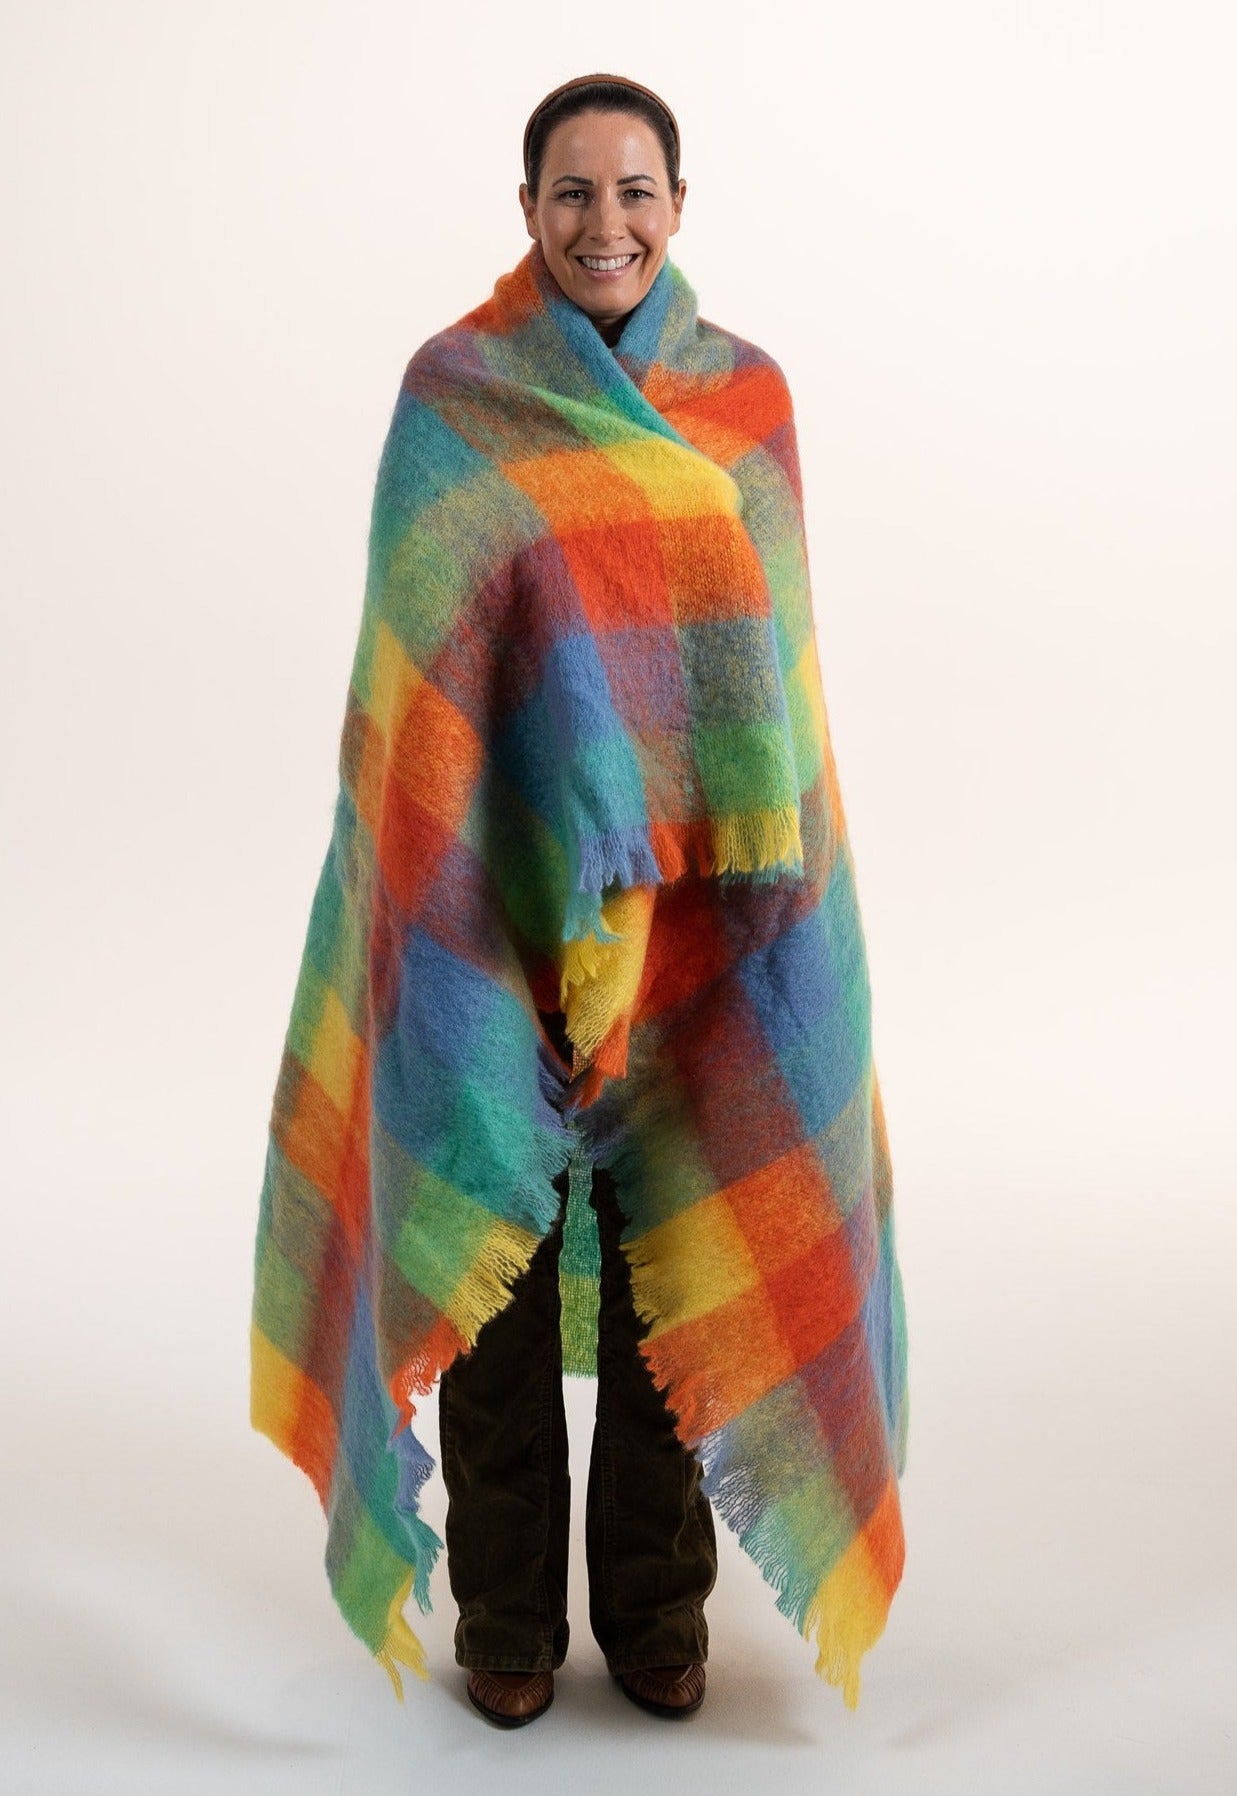 Mohair Wool Throw Blanket - 55% Mohair 34% Wool, Ultra Soft and